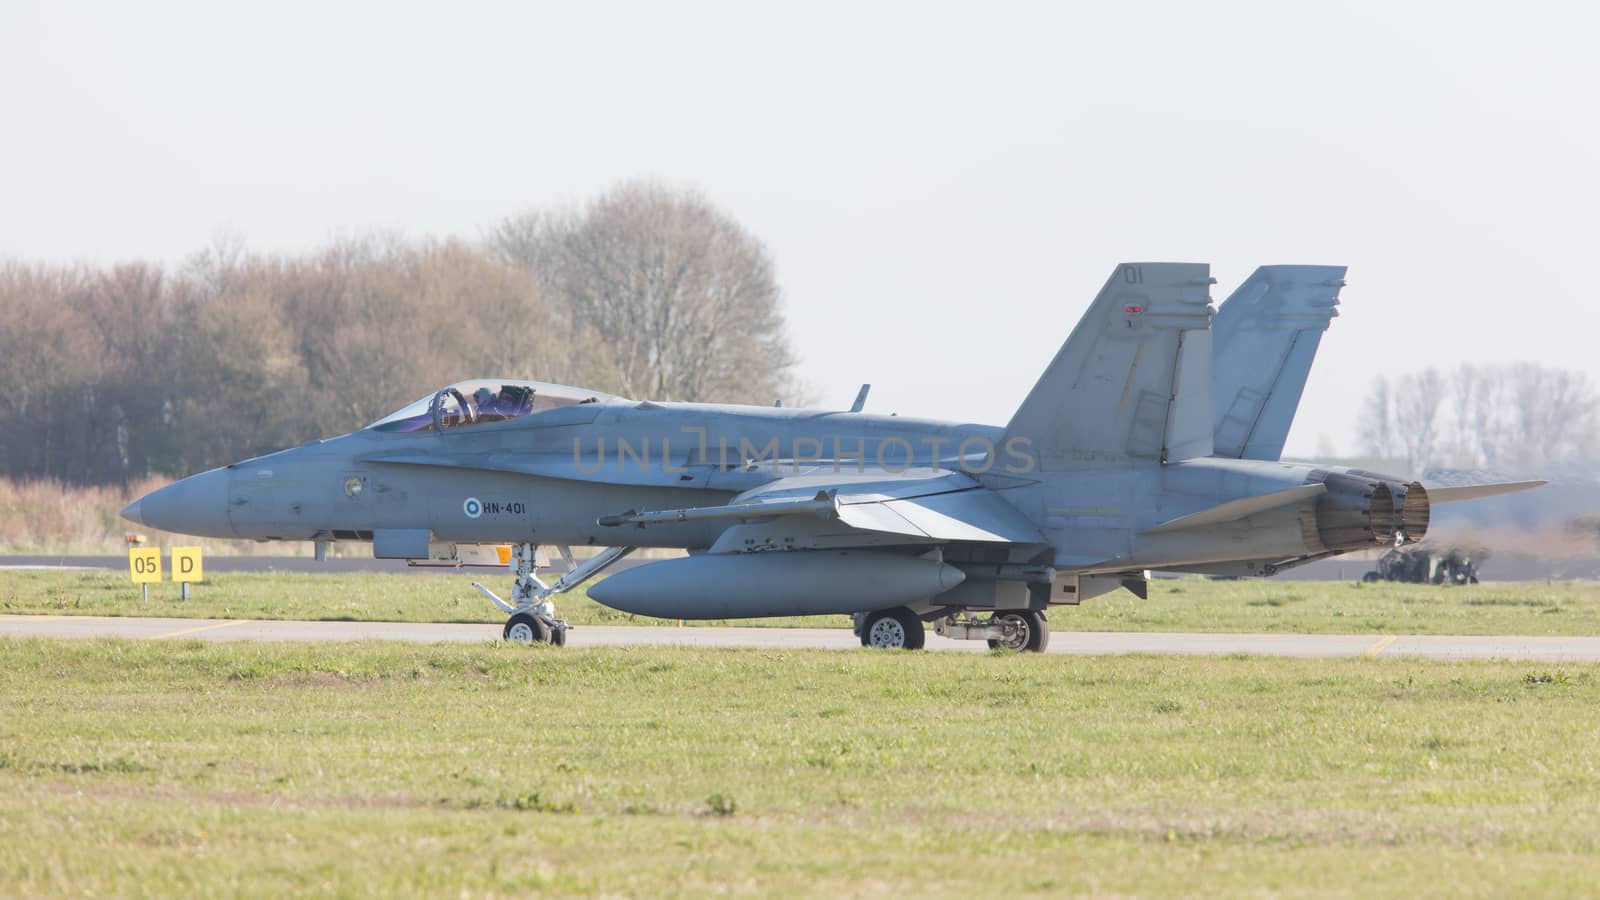 LEEUWARDEN, NETHERLANDS - APRIL 11, 2016: Finish Air Force F-18  by michaklootwijk